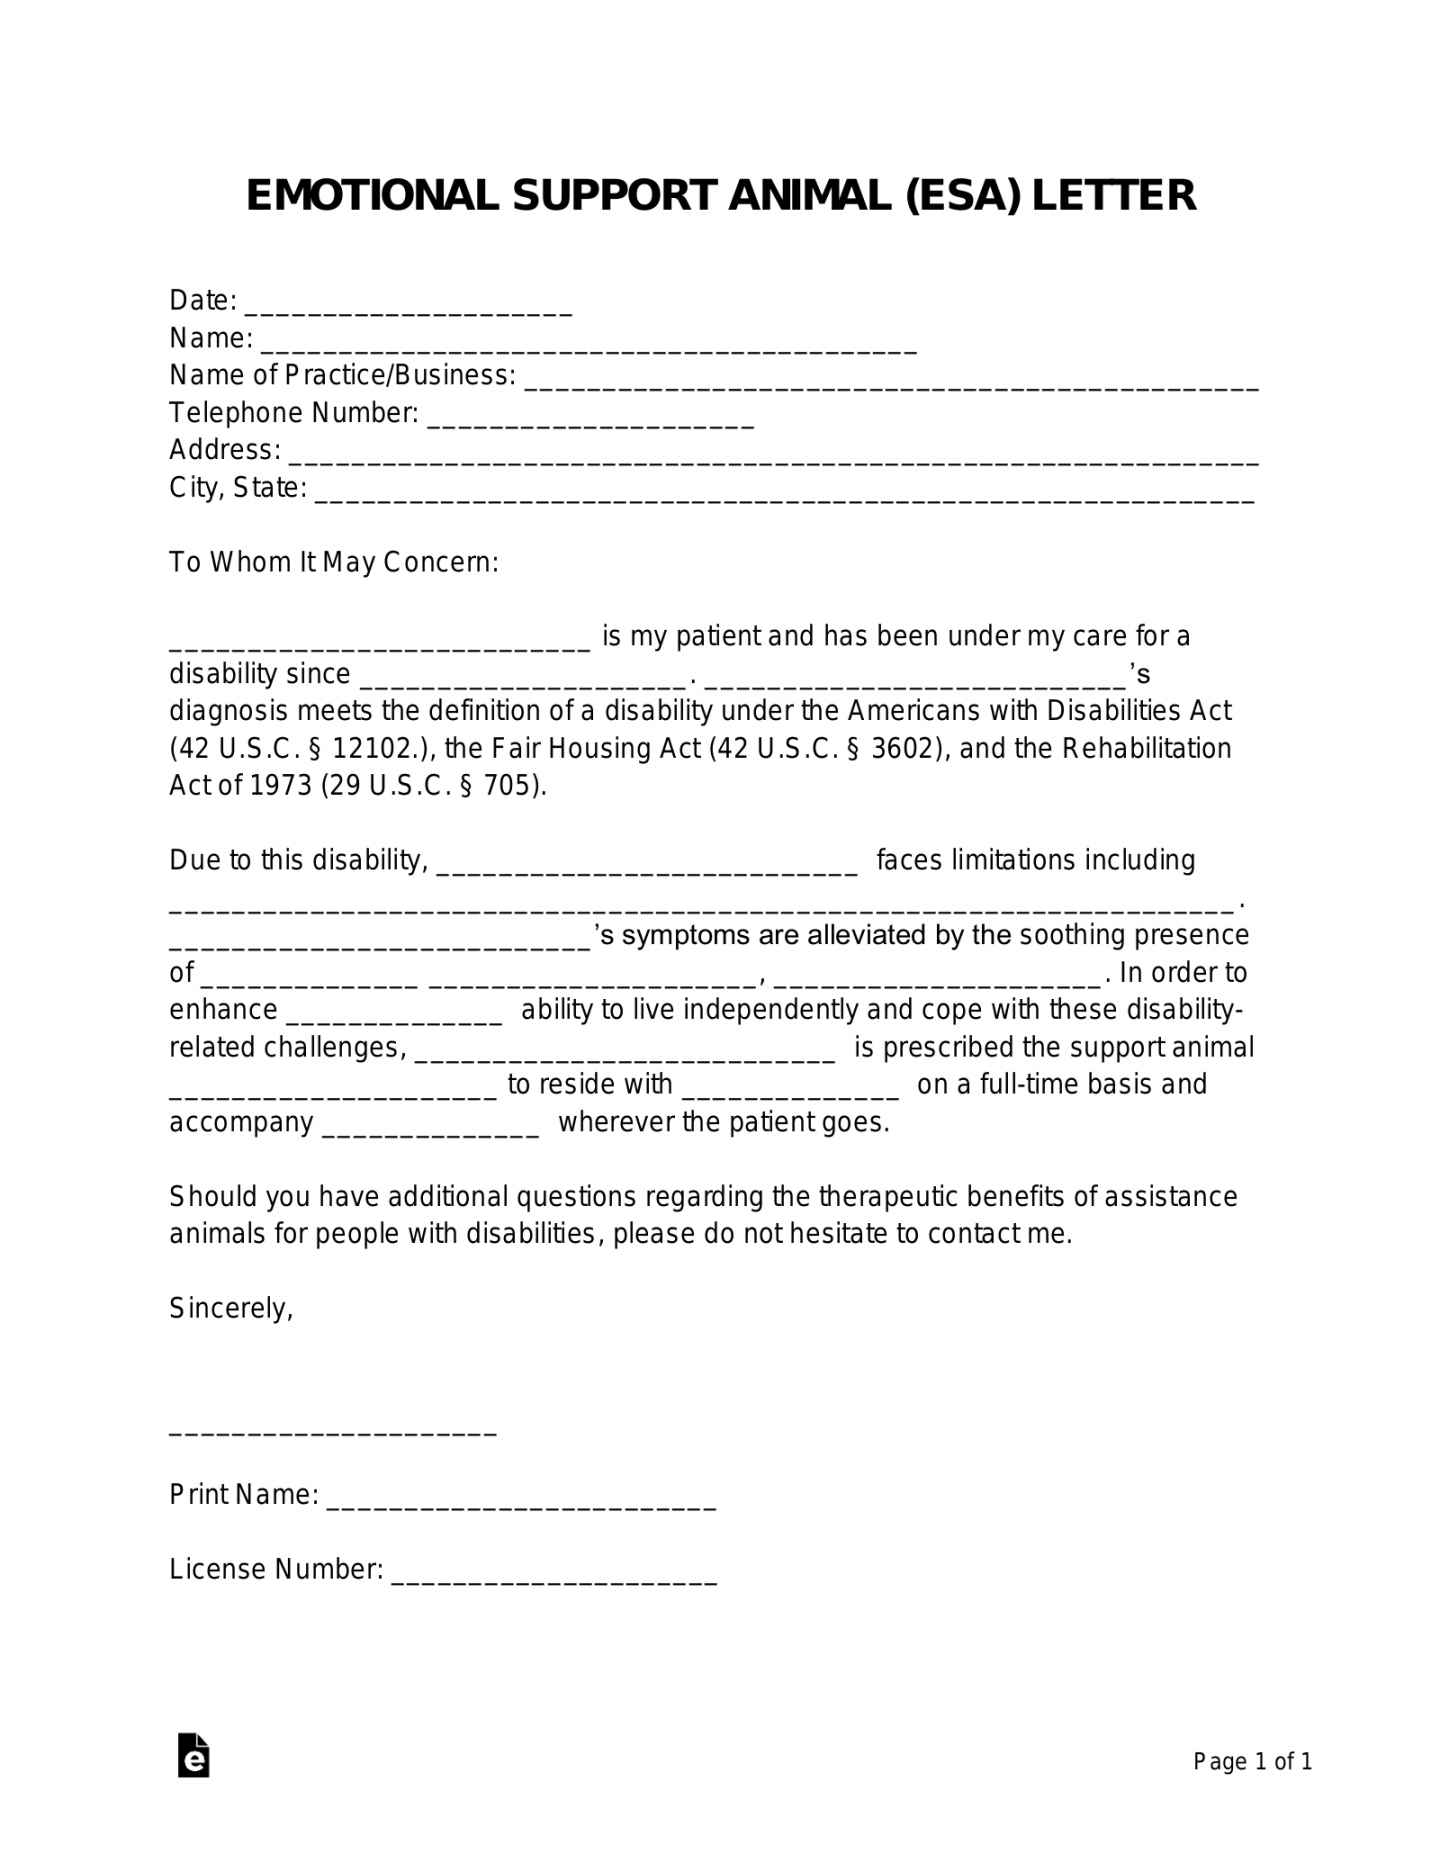 Free Emotional Support Animal (ESA) Letter Template - PDF  Word  - FREE Printables - Housing Printable Free Emotional Support Animal Letter